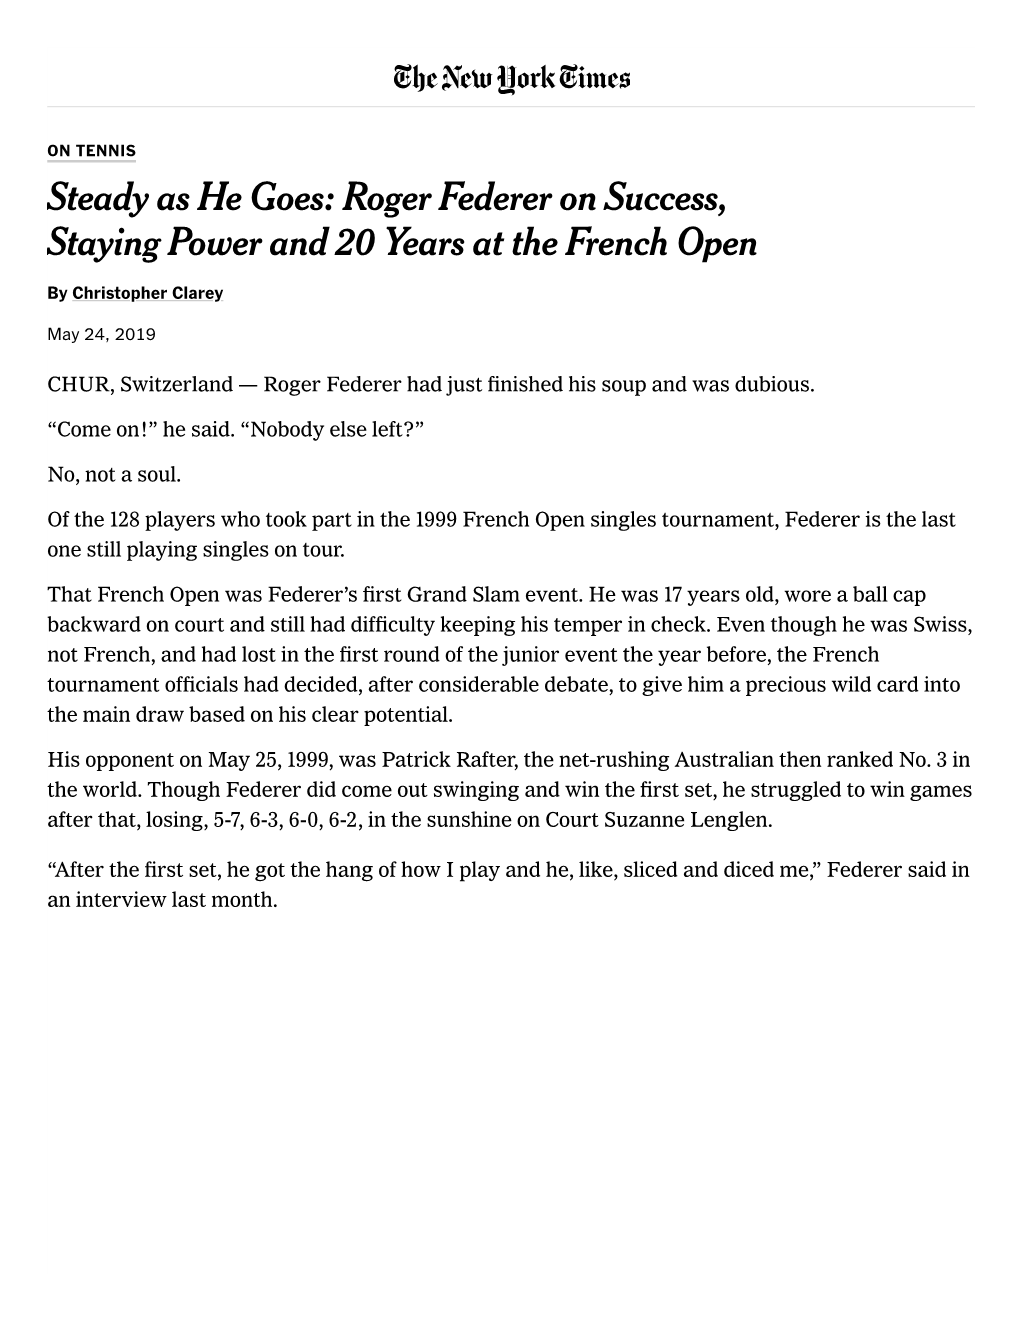 Roger Federer on Suc...T the French Open